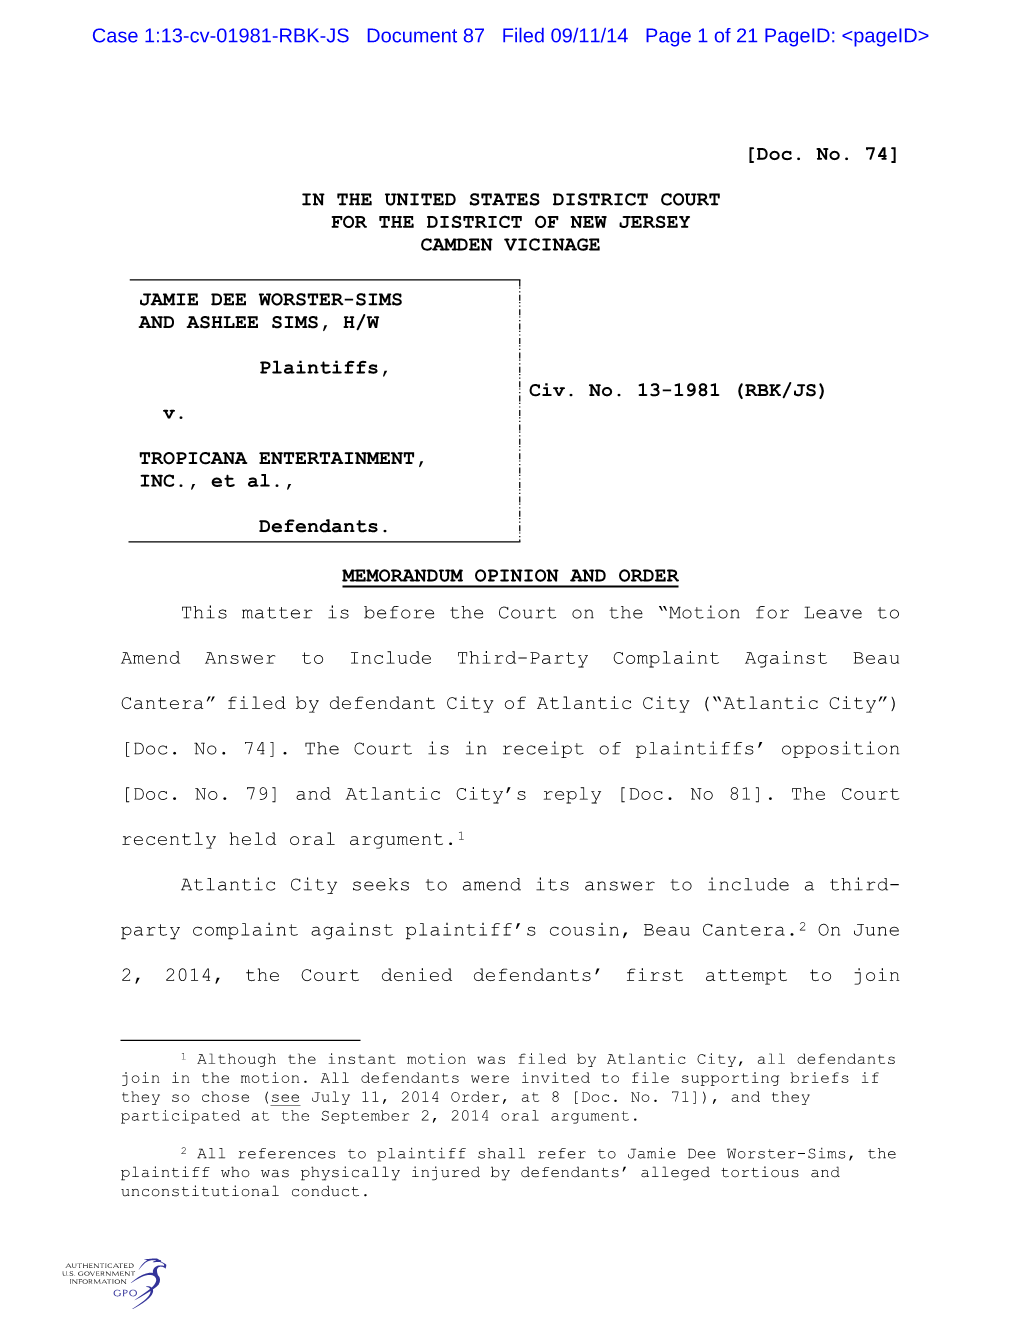 [Doc. No. 74] in the UNITED STATES DISTRICT COURT for THE